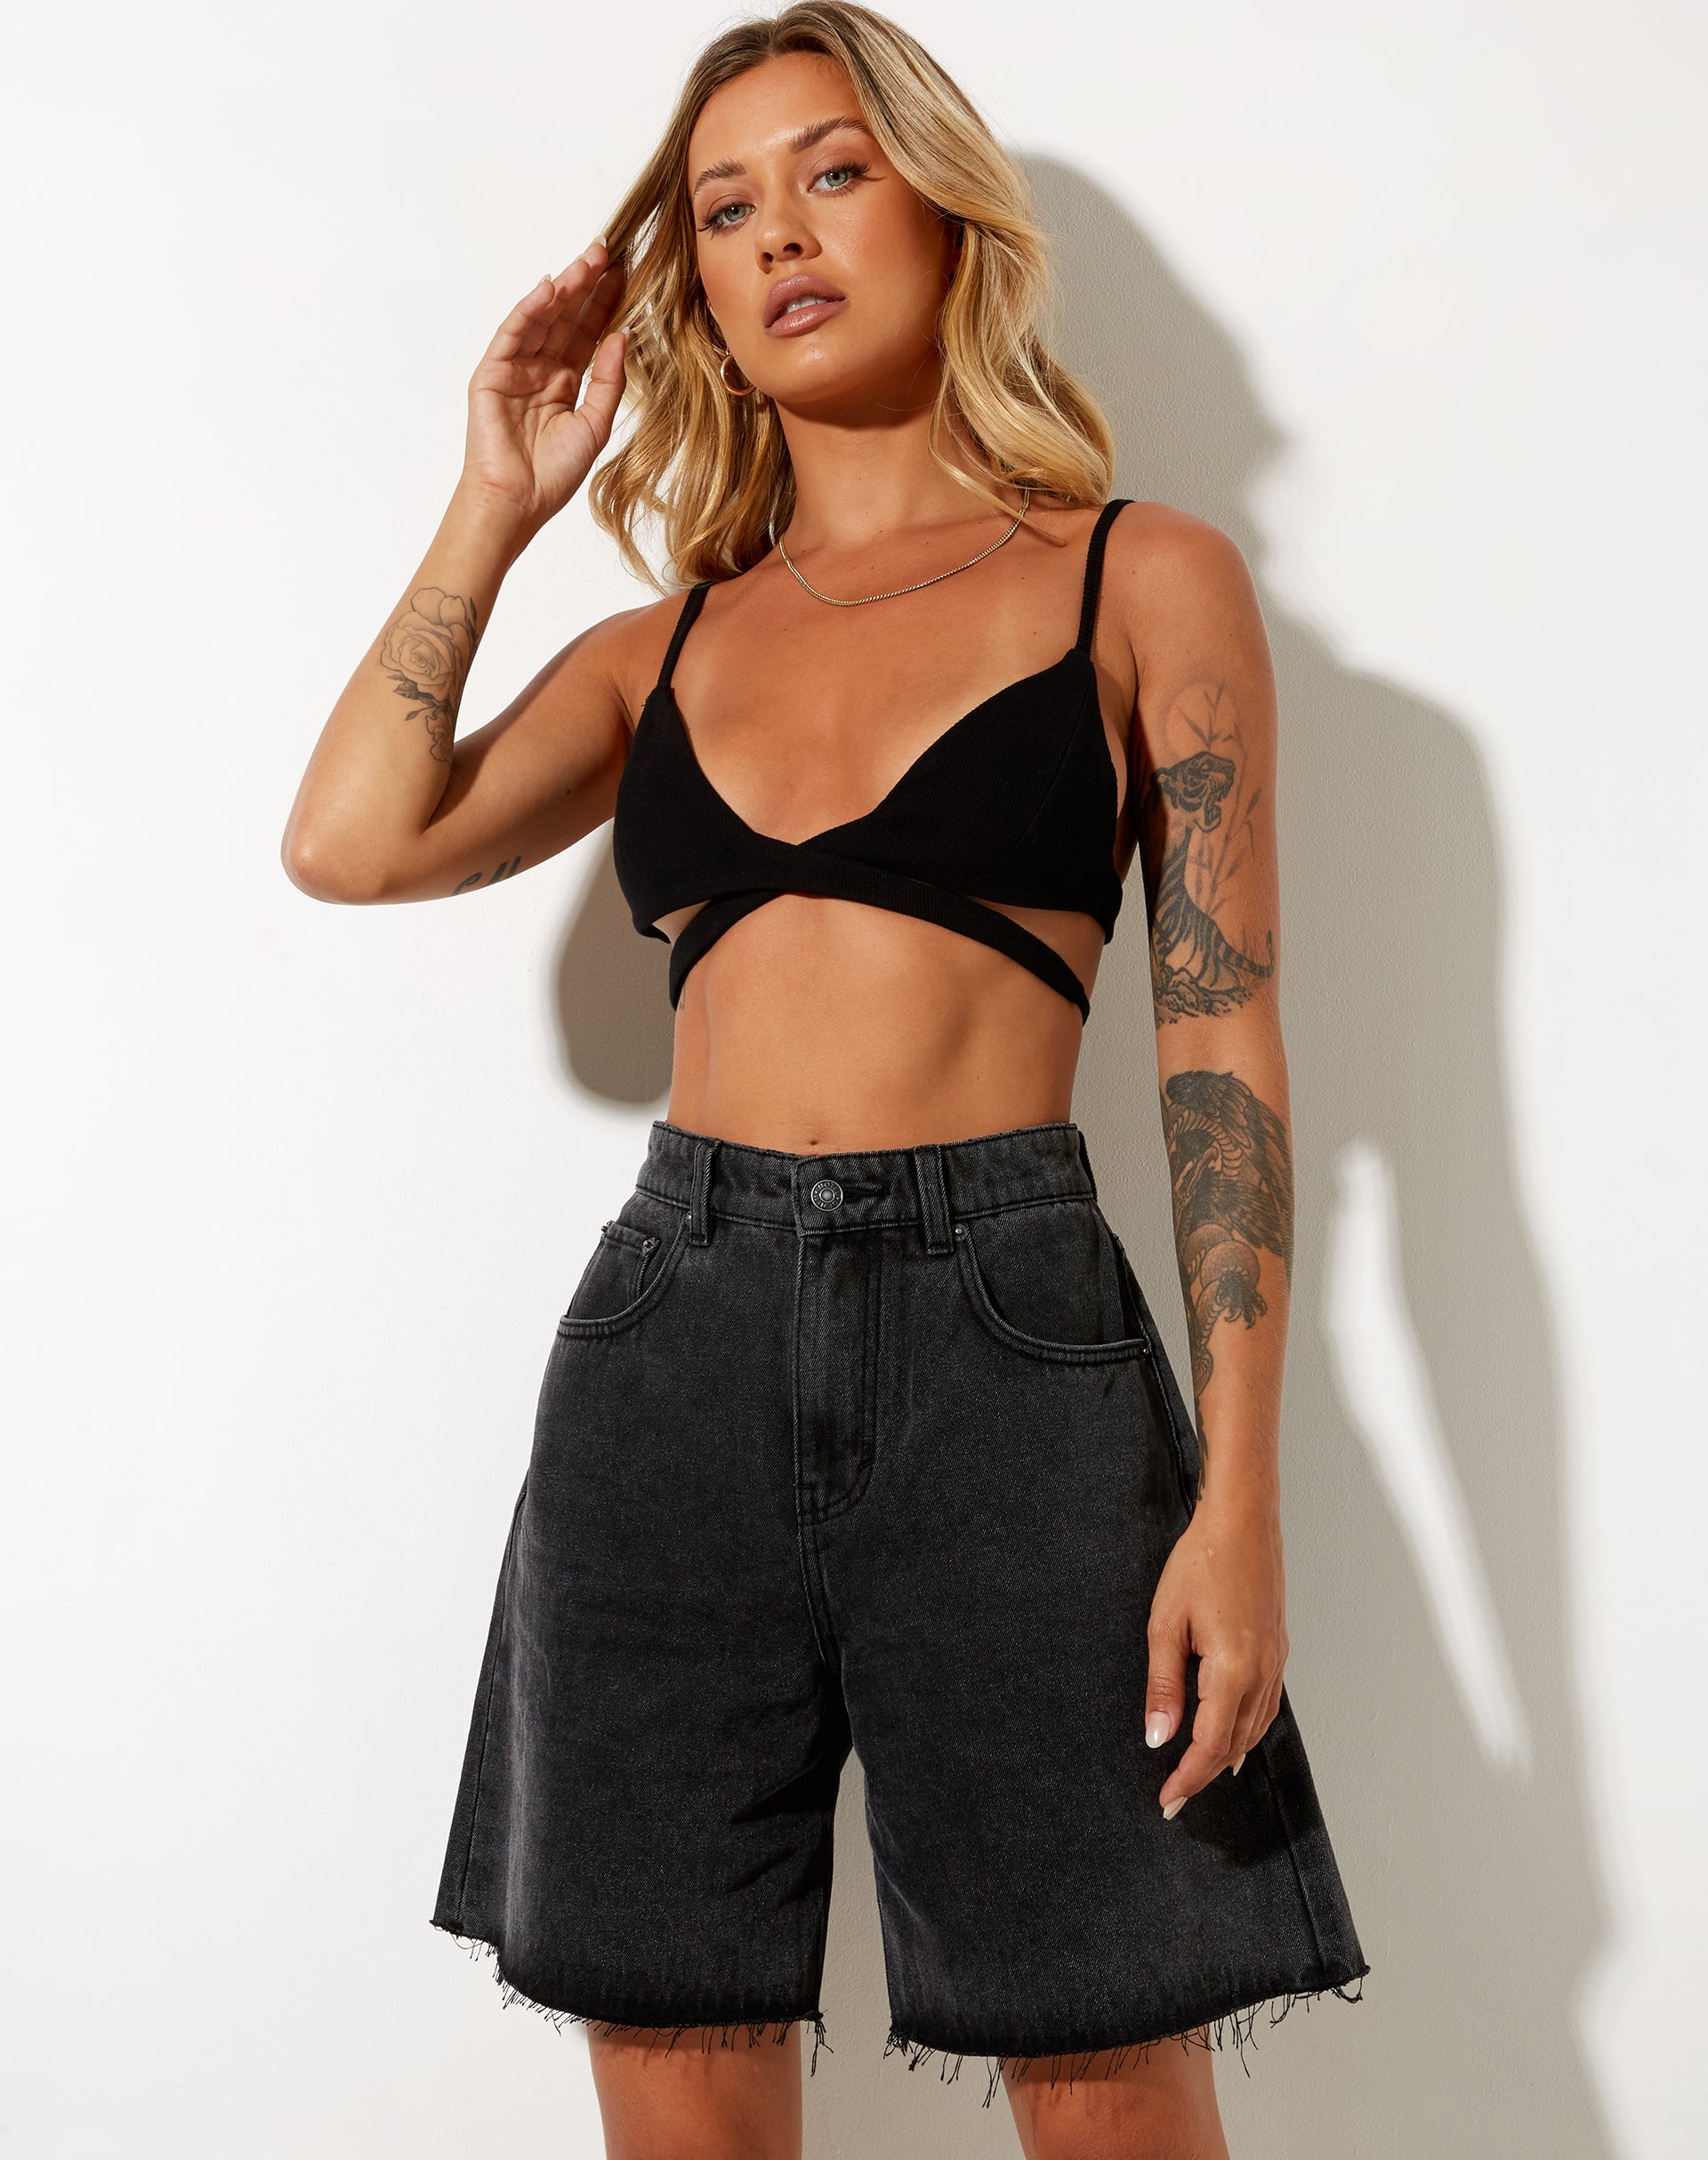 High Waisted Denim Roll Up Denim Mom Shorts For Women Benuynffy Streetwear  Casual Summer Fashion Loose Fit Jeans Style 230503 From Kong003, $19.19 |  DHgate.Com